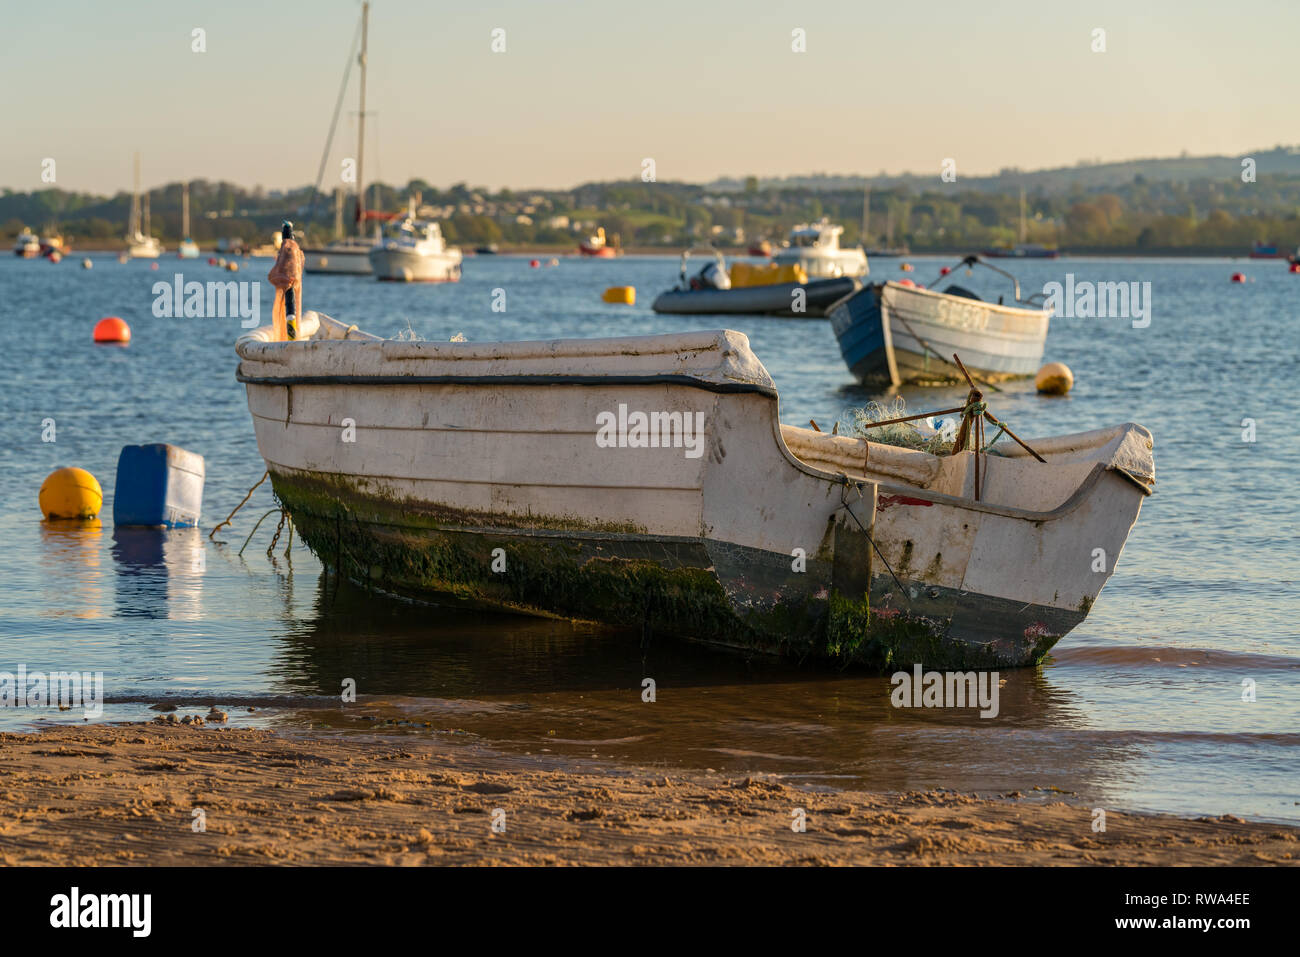 Emouth, Devon, England, UK - April 18, 2017: A Boat on the shore of the River Exe with other boats floating in the river in the background Stock Photo